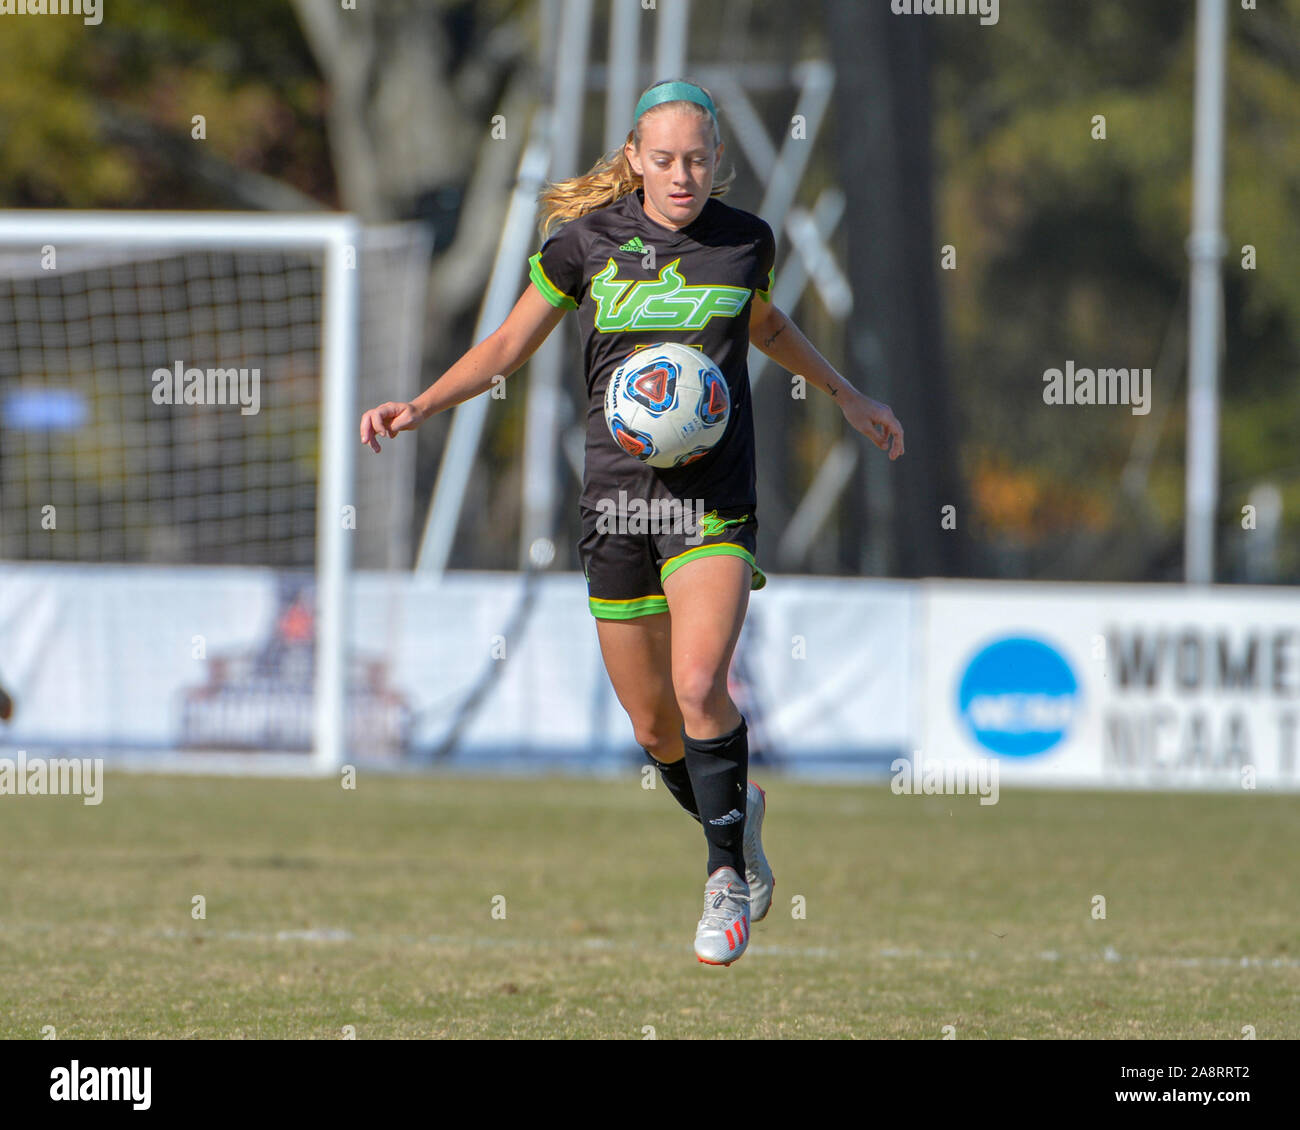 Memphis, TN, USA. 10th Nov, 2019. South Florida forward, Sydny Nasello (35), brings the ball under control during the NCAA Women's Soccer Championship match between the University of South Florida Bulls and the University of Memphis Tigers at The University of Memphis in Memphis, TN. Kevin Langley/Sports South Media/CSM/Alamy Live News Stock Photo